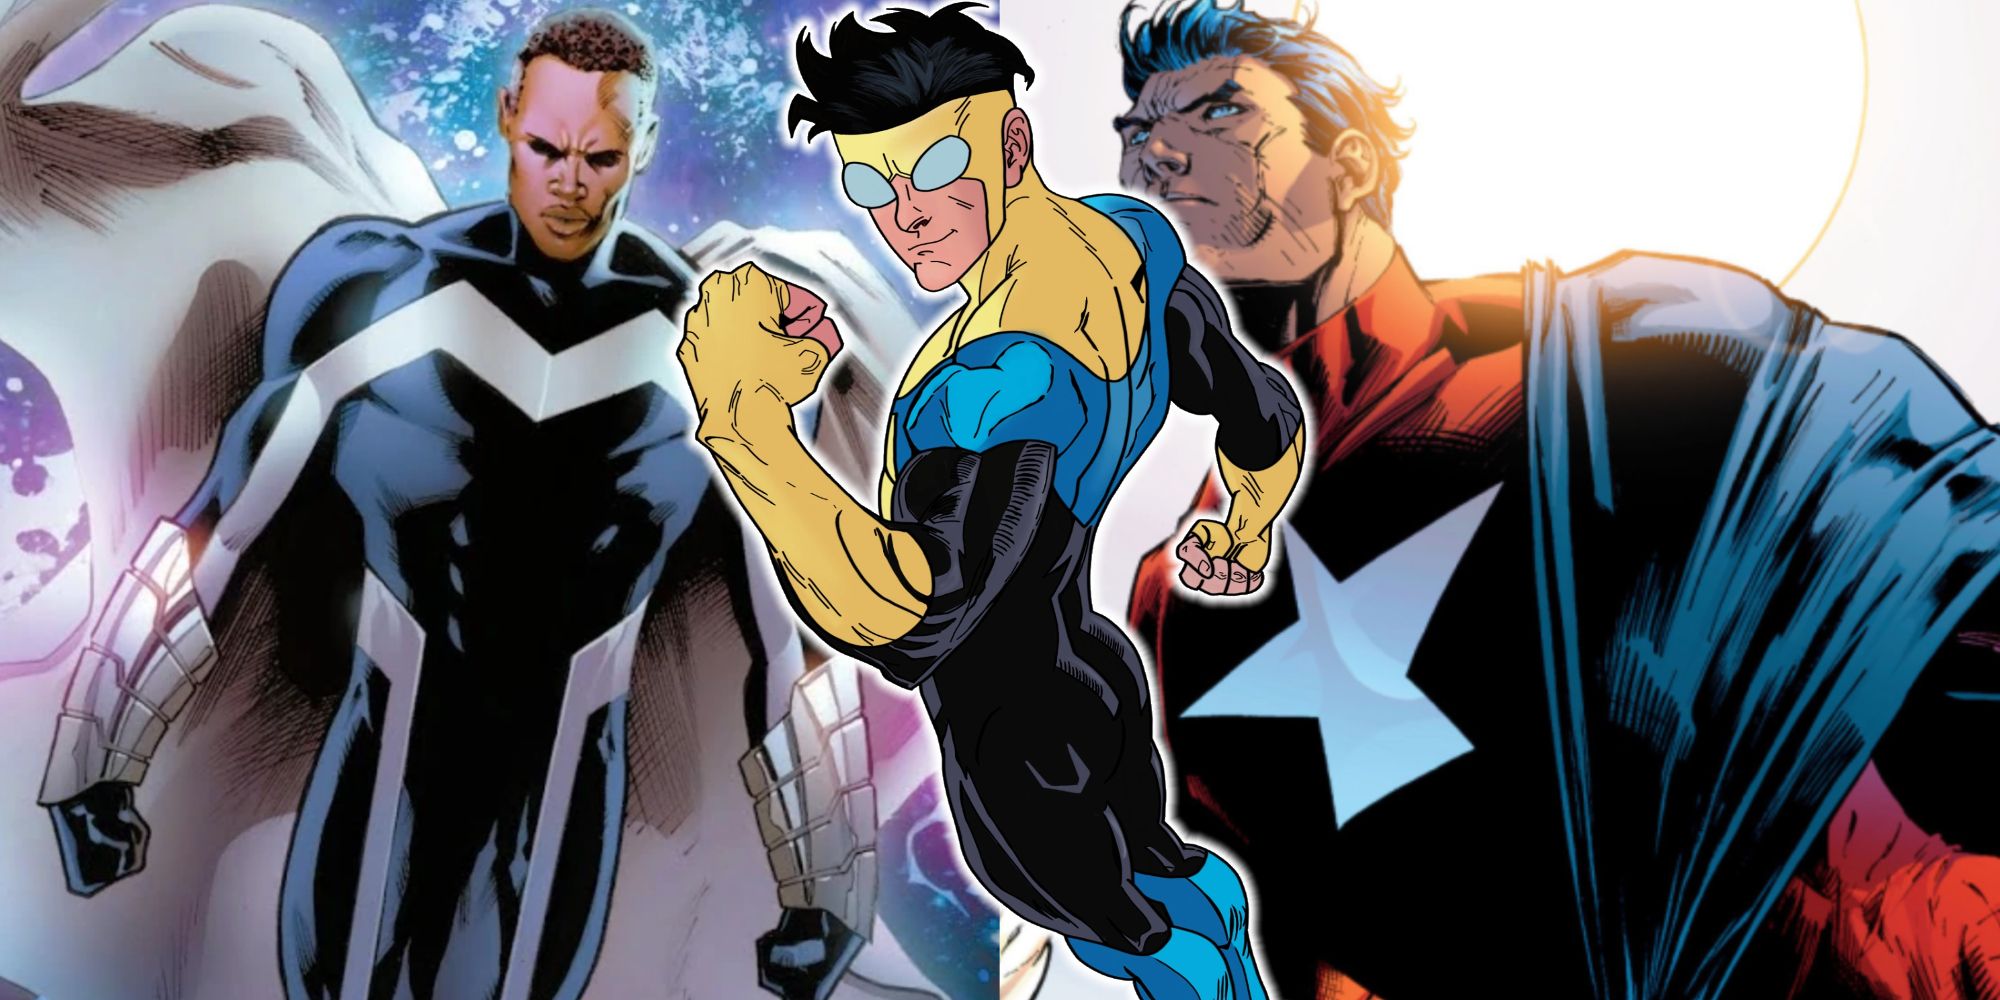 Split image of Blue Marvel in Marvel Comics, Samaritan from Astro City, and Invincible in Image Comics